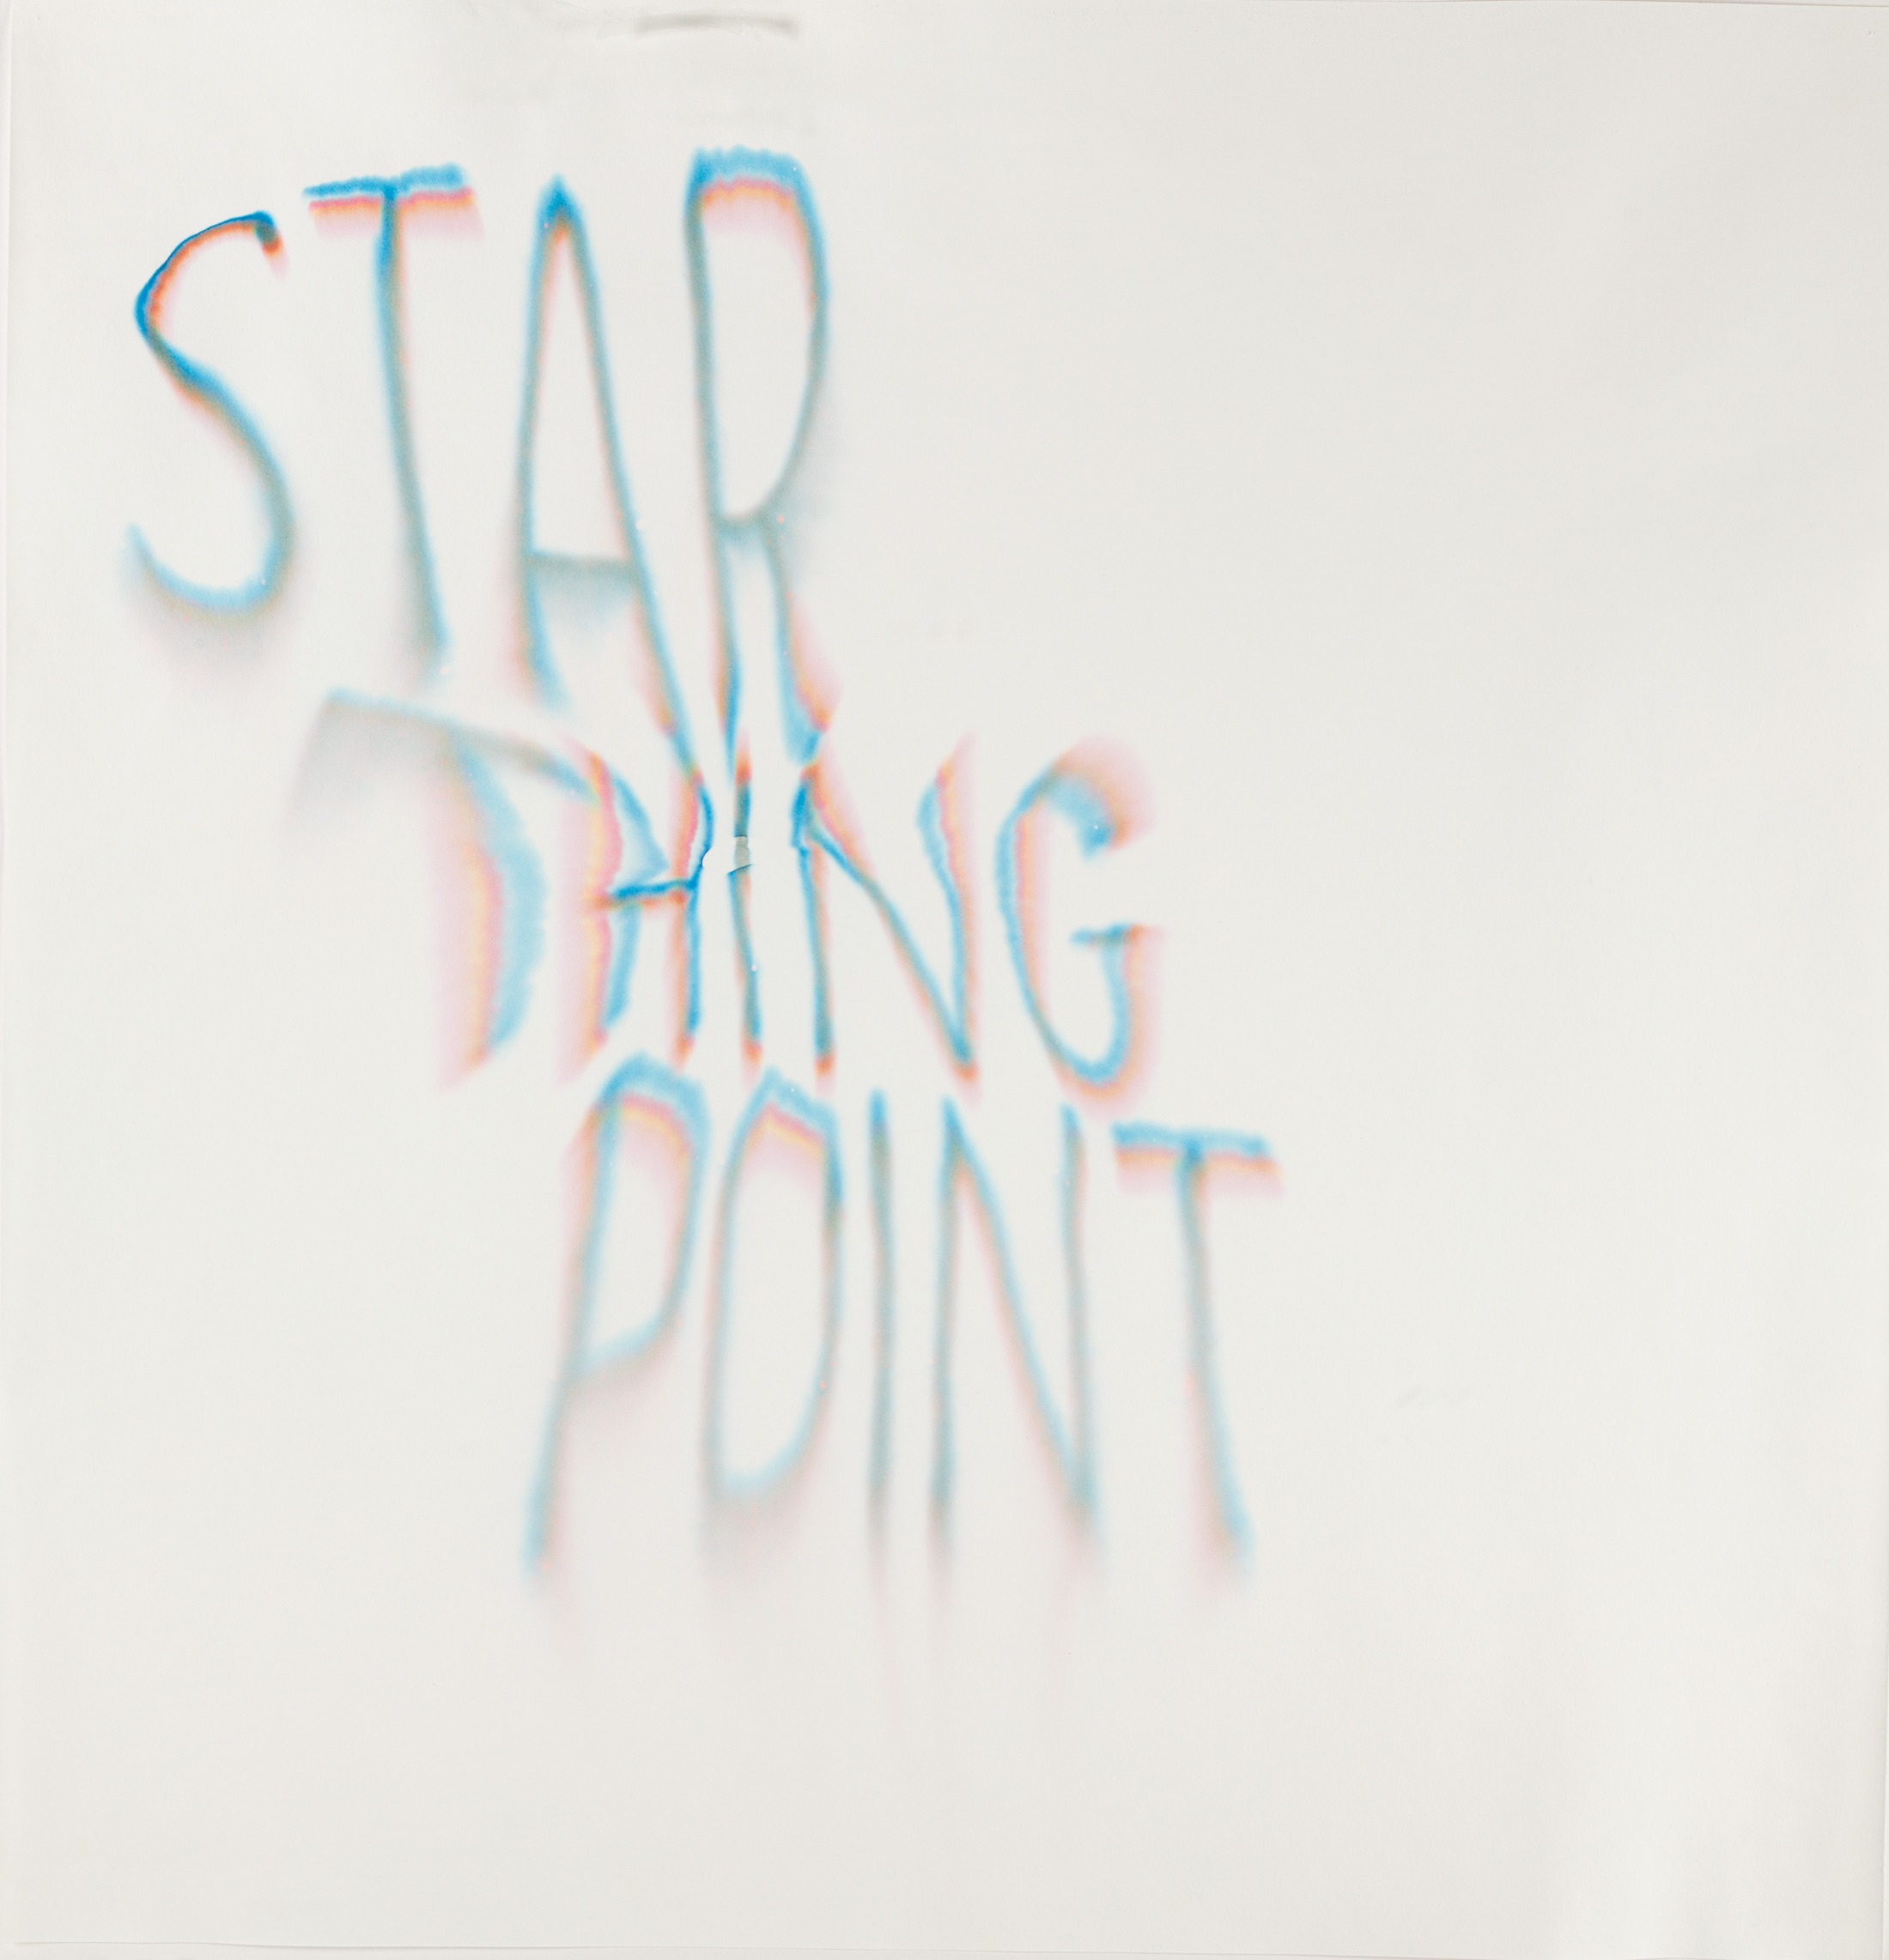 Navid Nuur, Star Thing Point, 2007, ink wash with bath water on paper, 59.5 × 47.2 cm, courtesy of Teylers Museum, donation by Tanya Rumpff